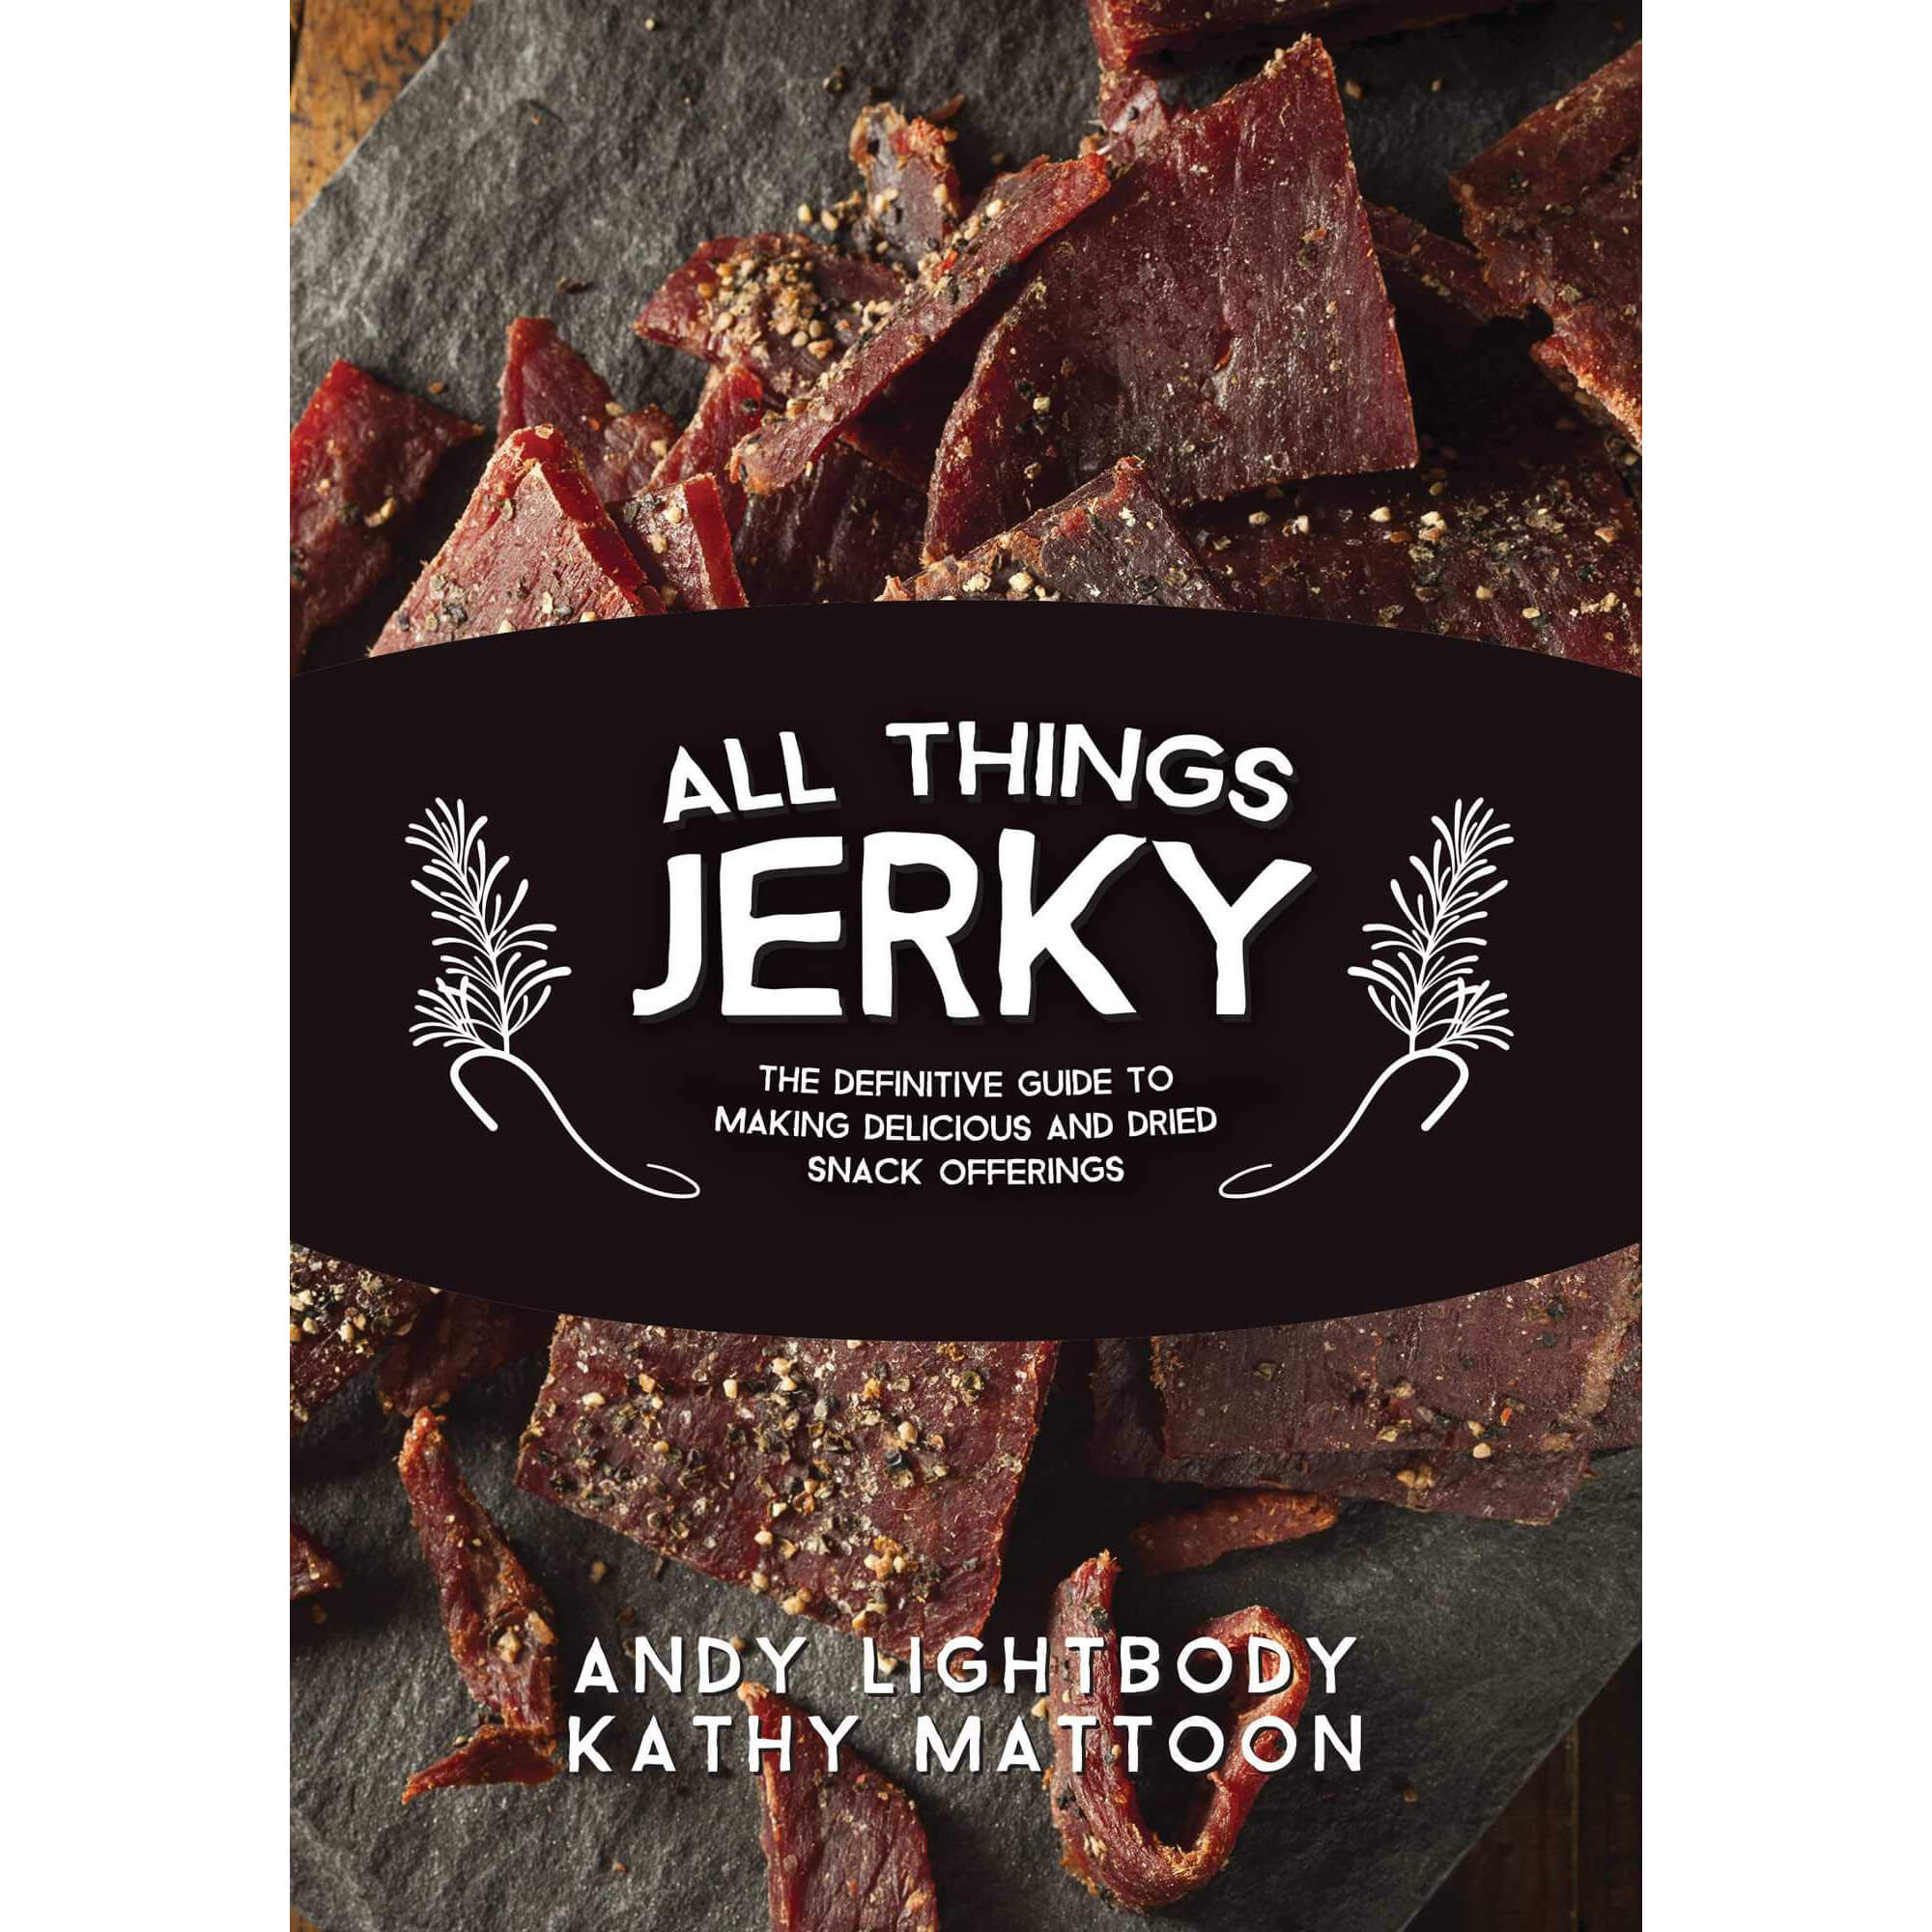 All Things Jerky front cover.